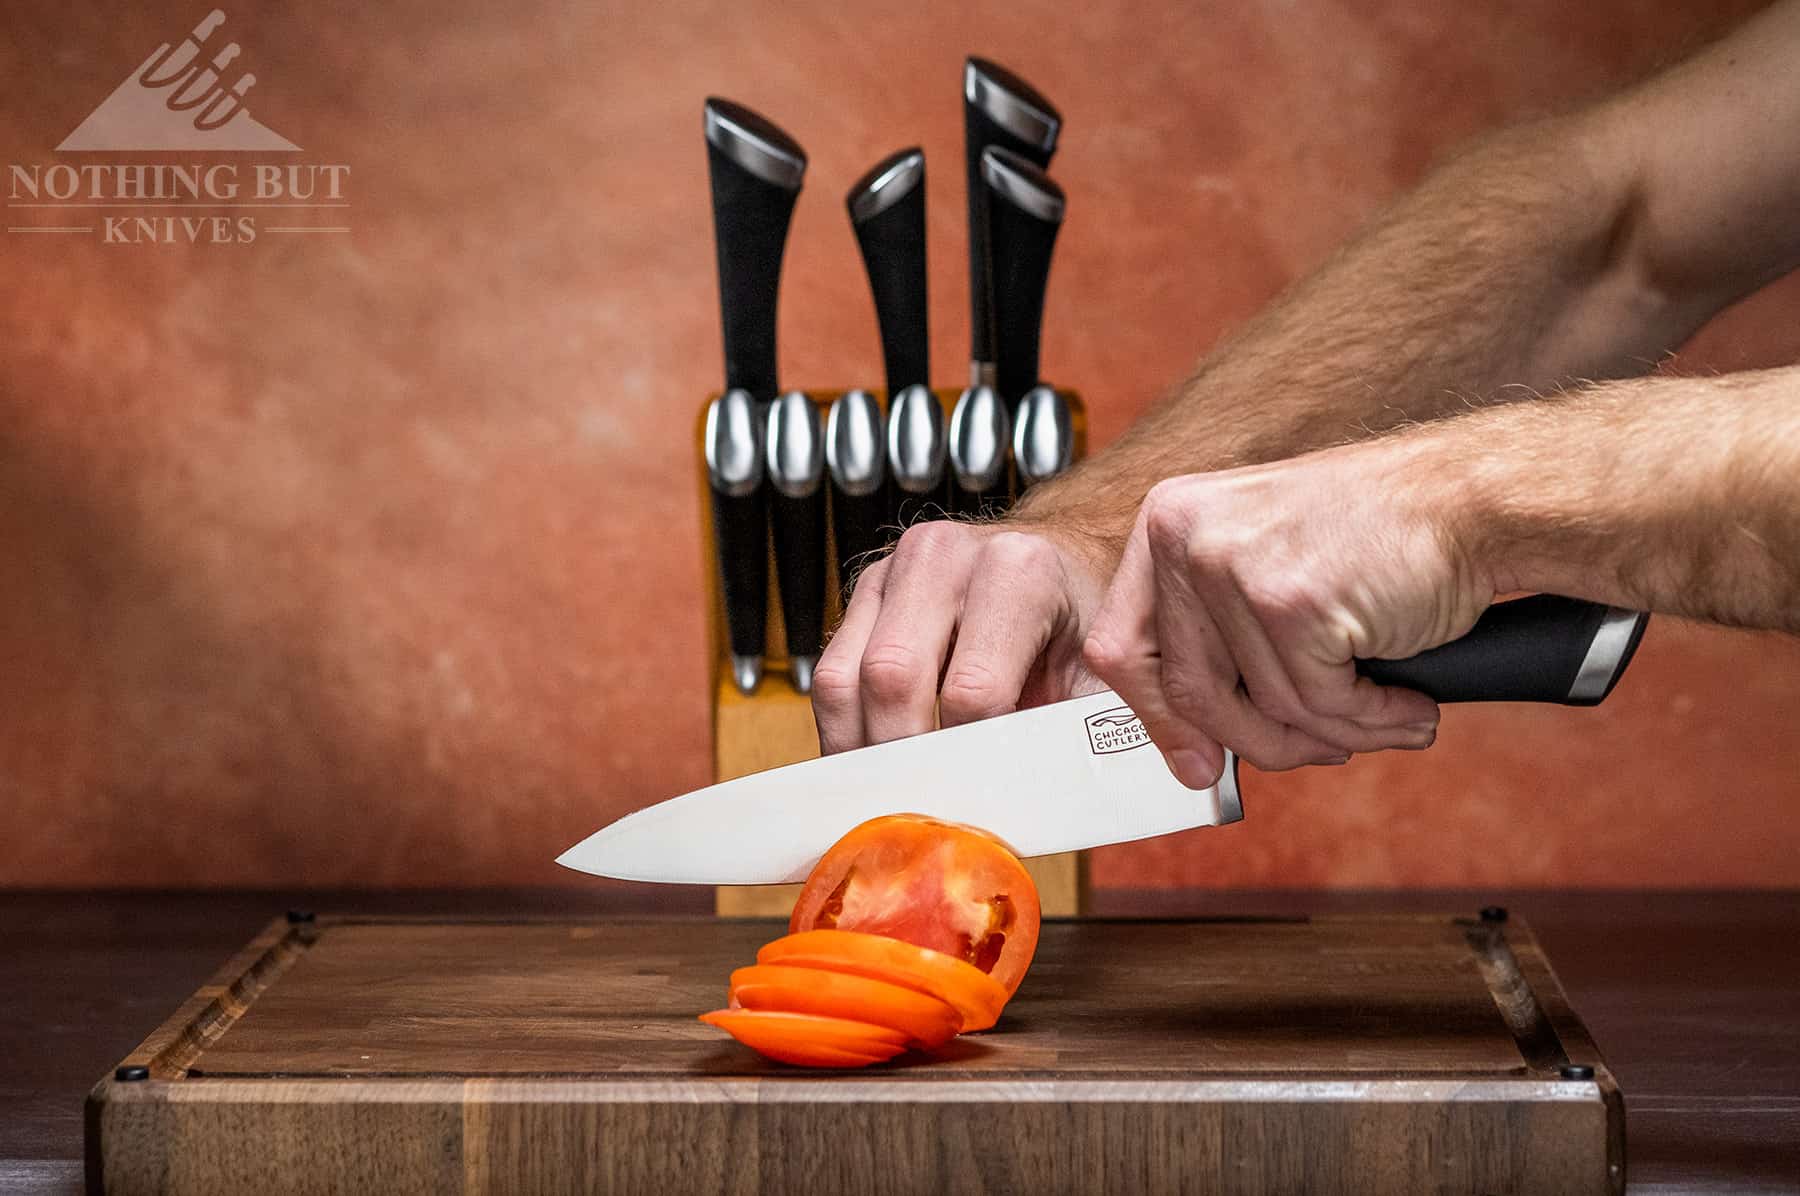 https://www.nothingbutknives.com/wp-content/uploads/2017/03/Chicago-Cutlery-Fusion-12-Piece-Set.jpg